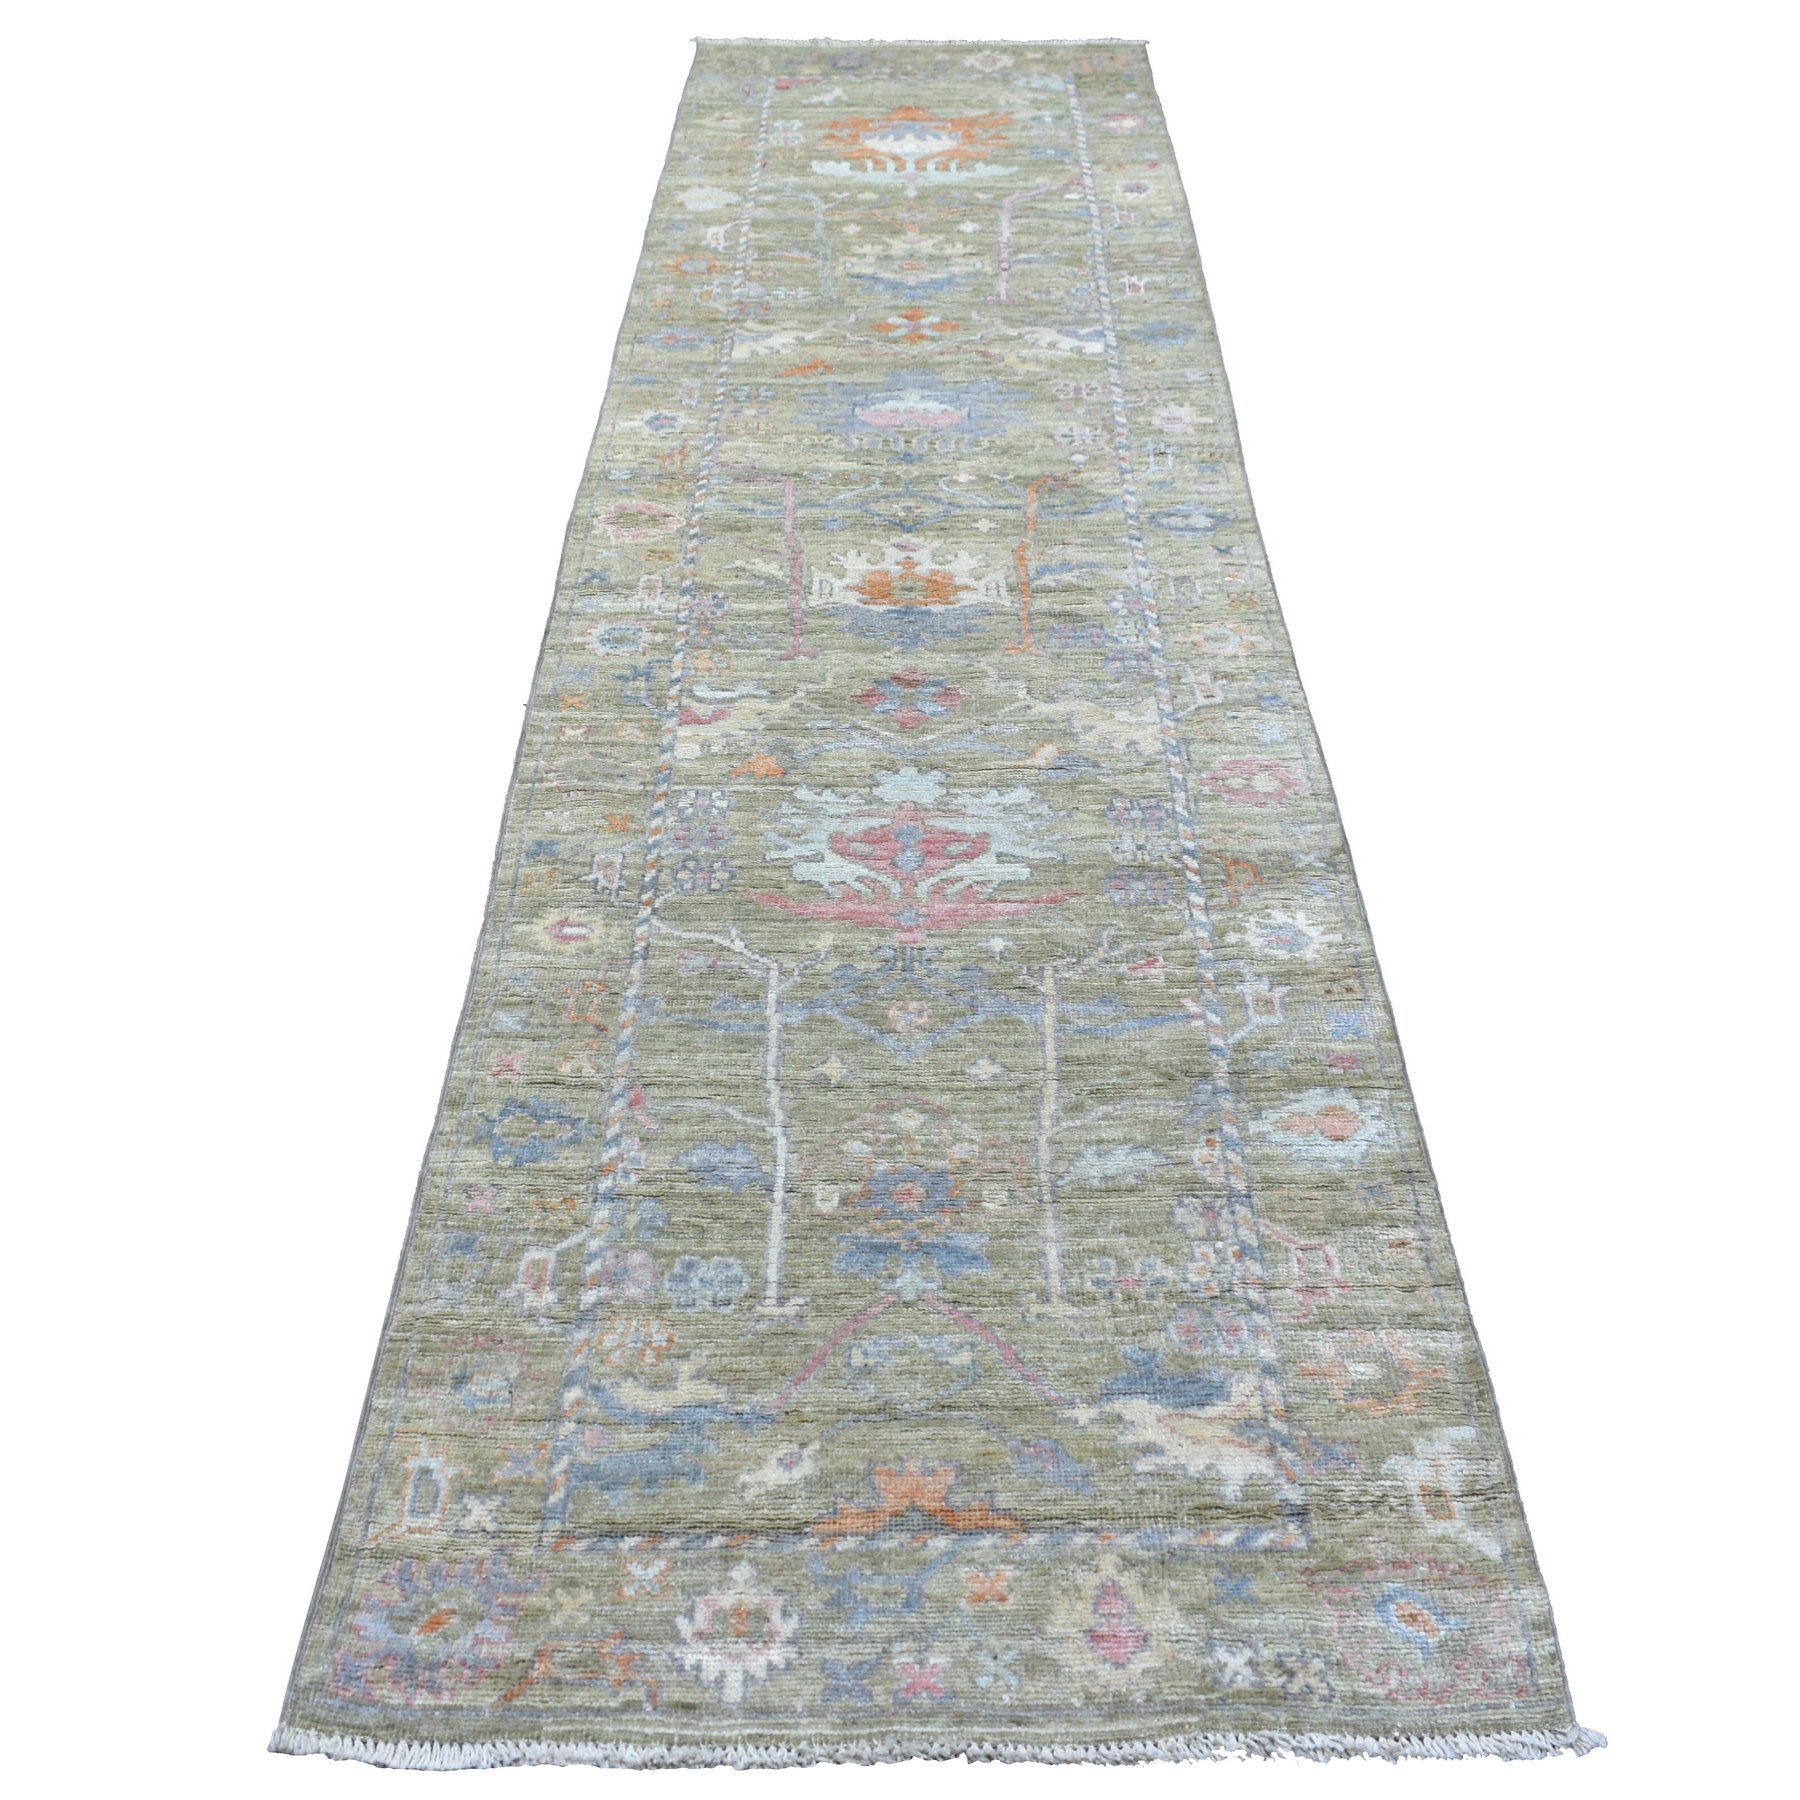 3'x11'7" Afghan Angora Ushak with Assortment of Colors Extra Soft Wool Hand Woven Lime Green Oriental Runner Rug 